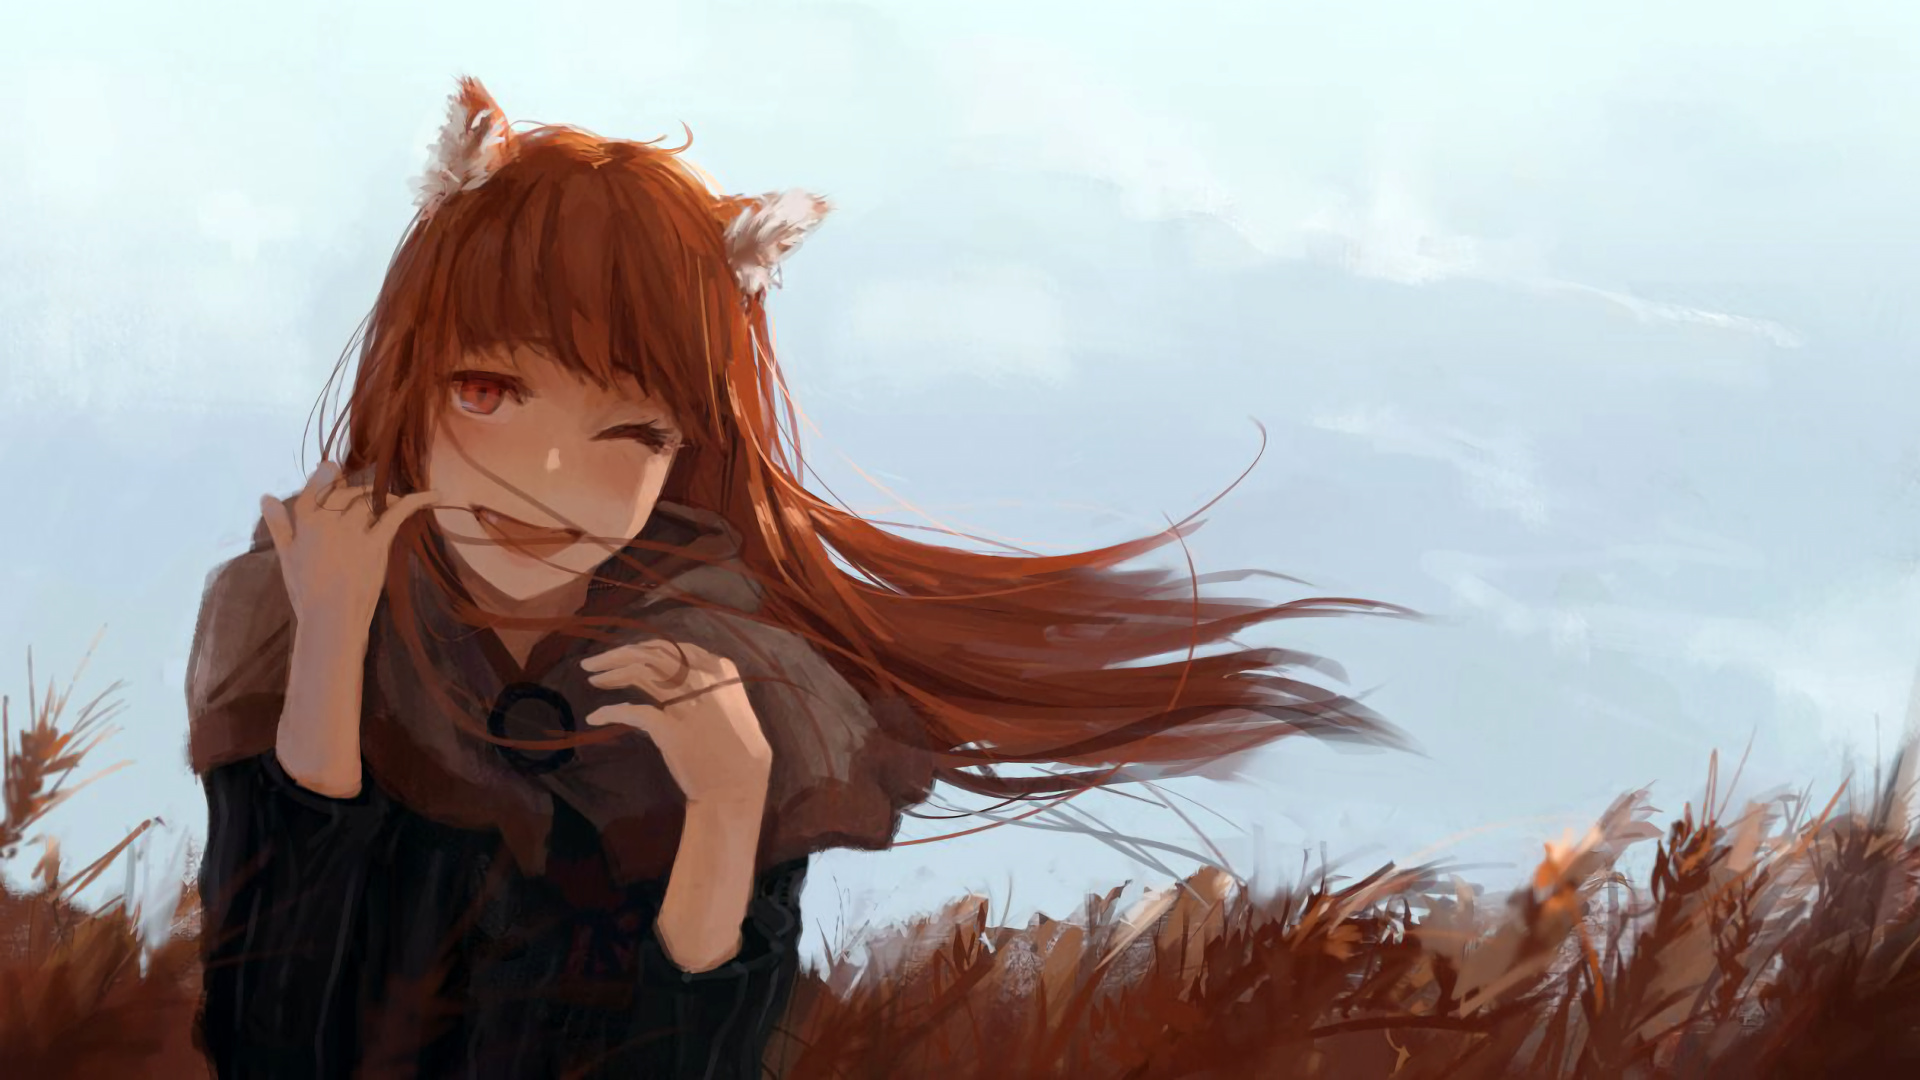 Spice and Wolf (Anime): Living for many centuries, Great hearing. 1920x1080 Full HD Background.